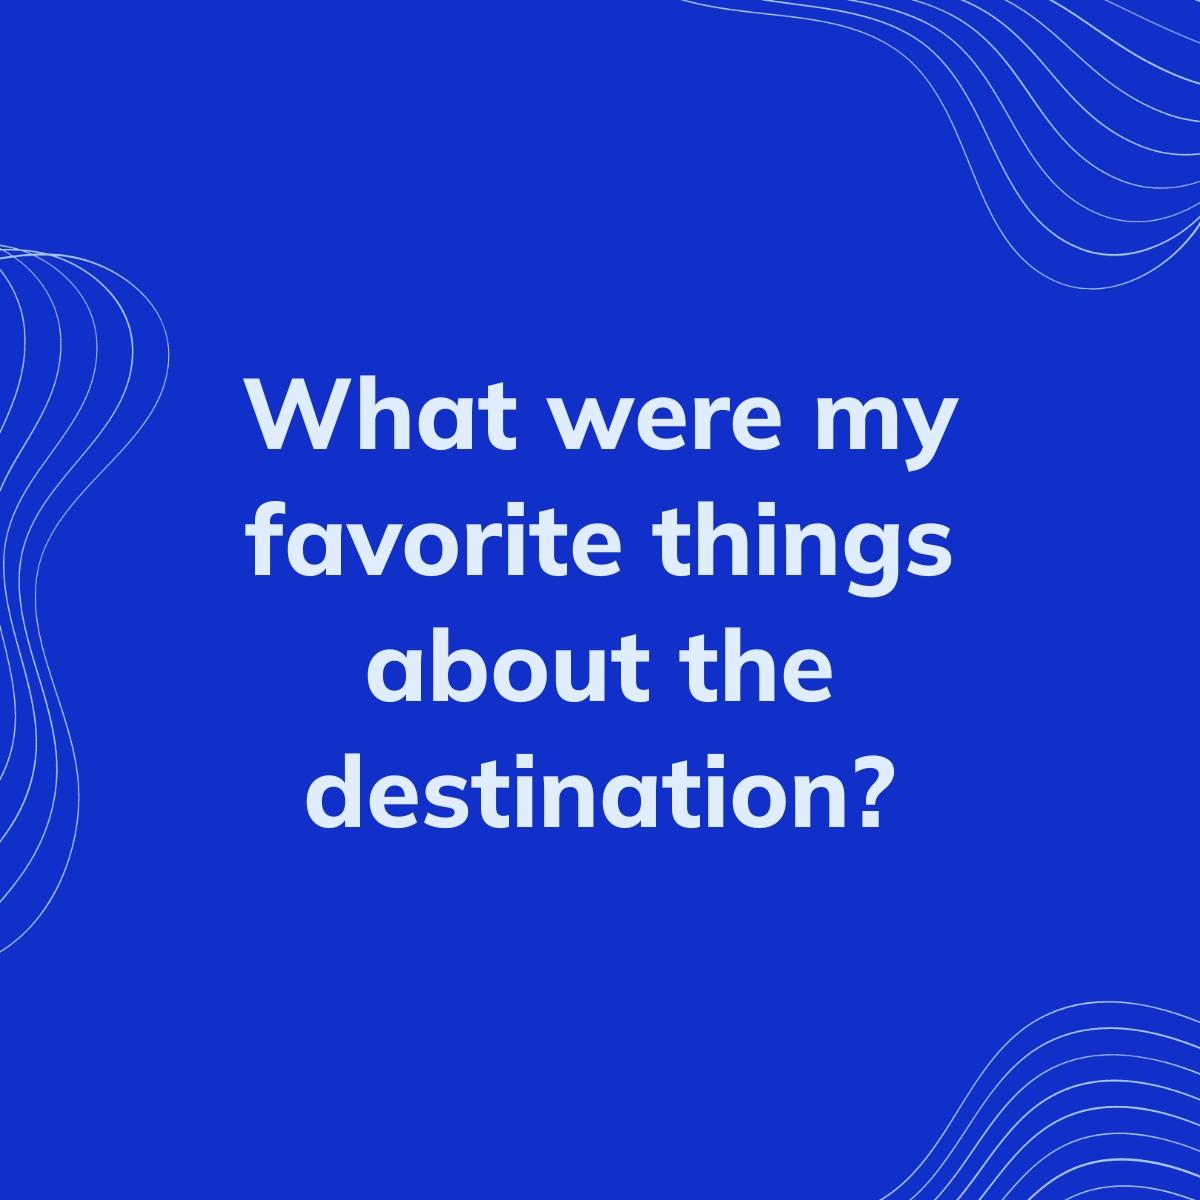 Journal Prompt: What were my favorite things about the destination?